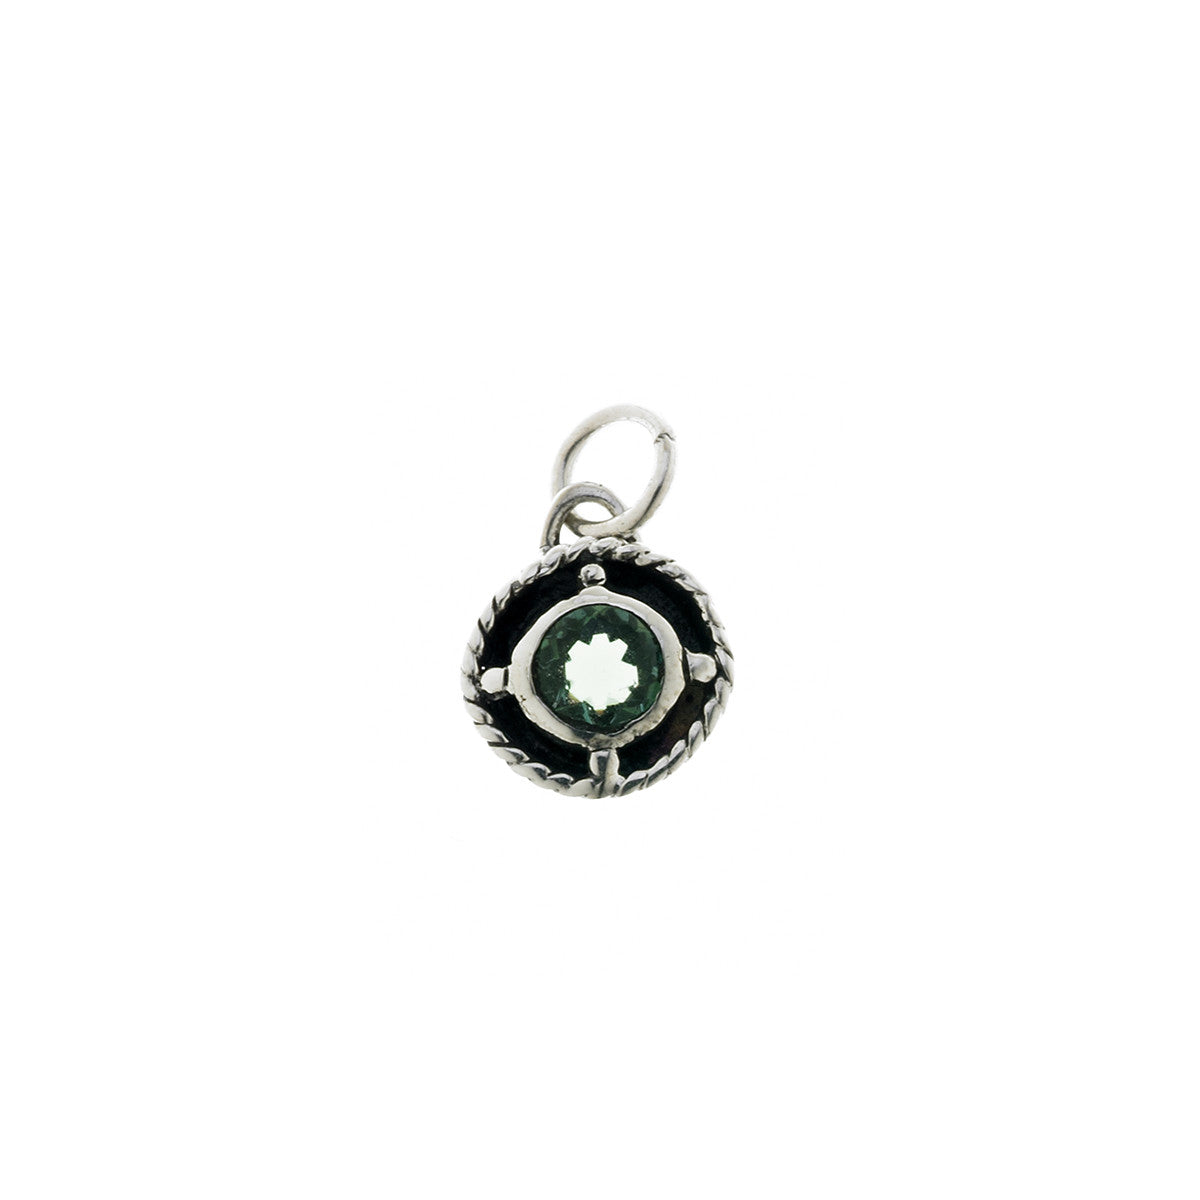 Kamon Sterling Silver And Green Quartz May Charm - Cynthia Gale New York Jewelry